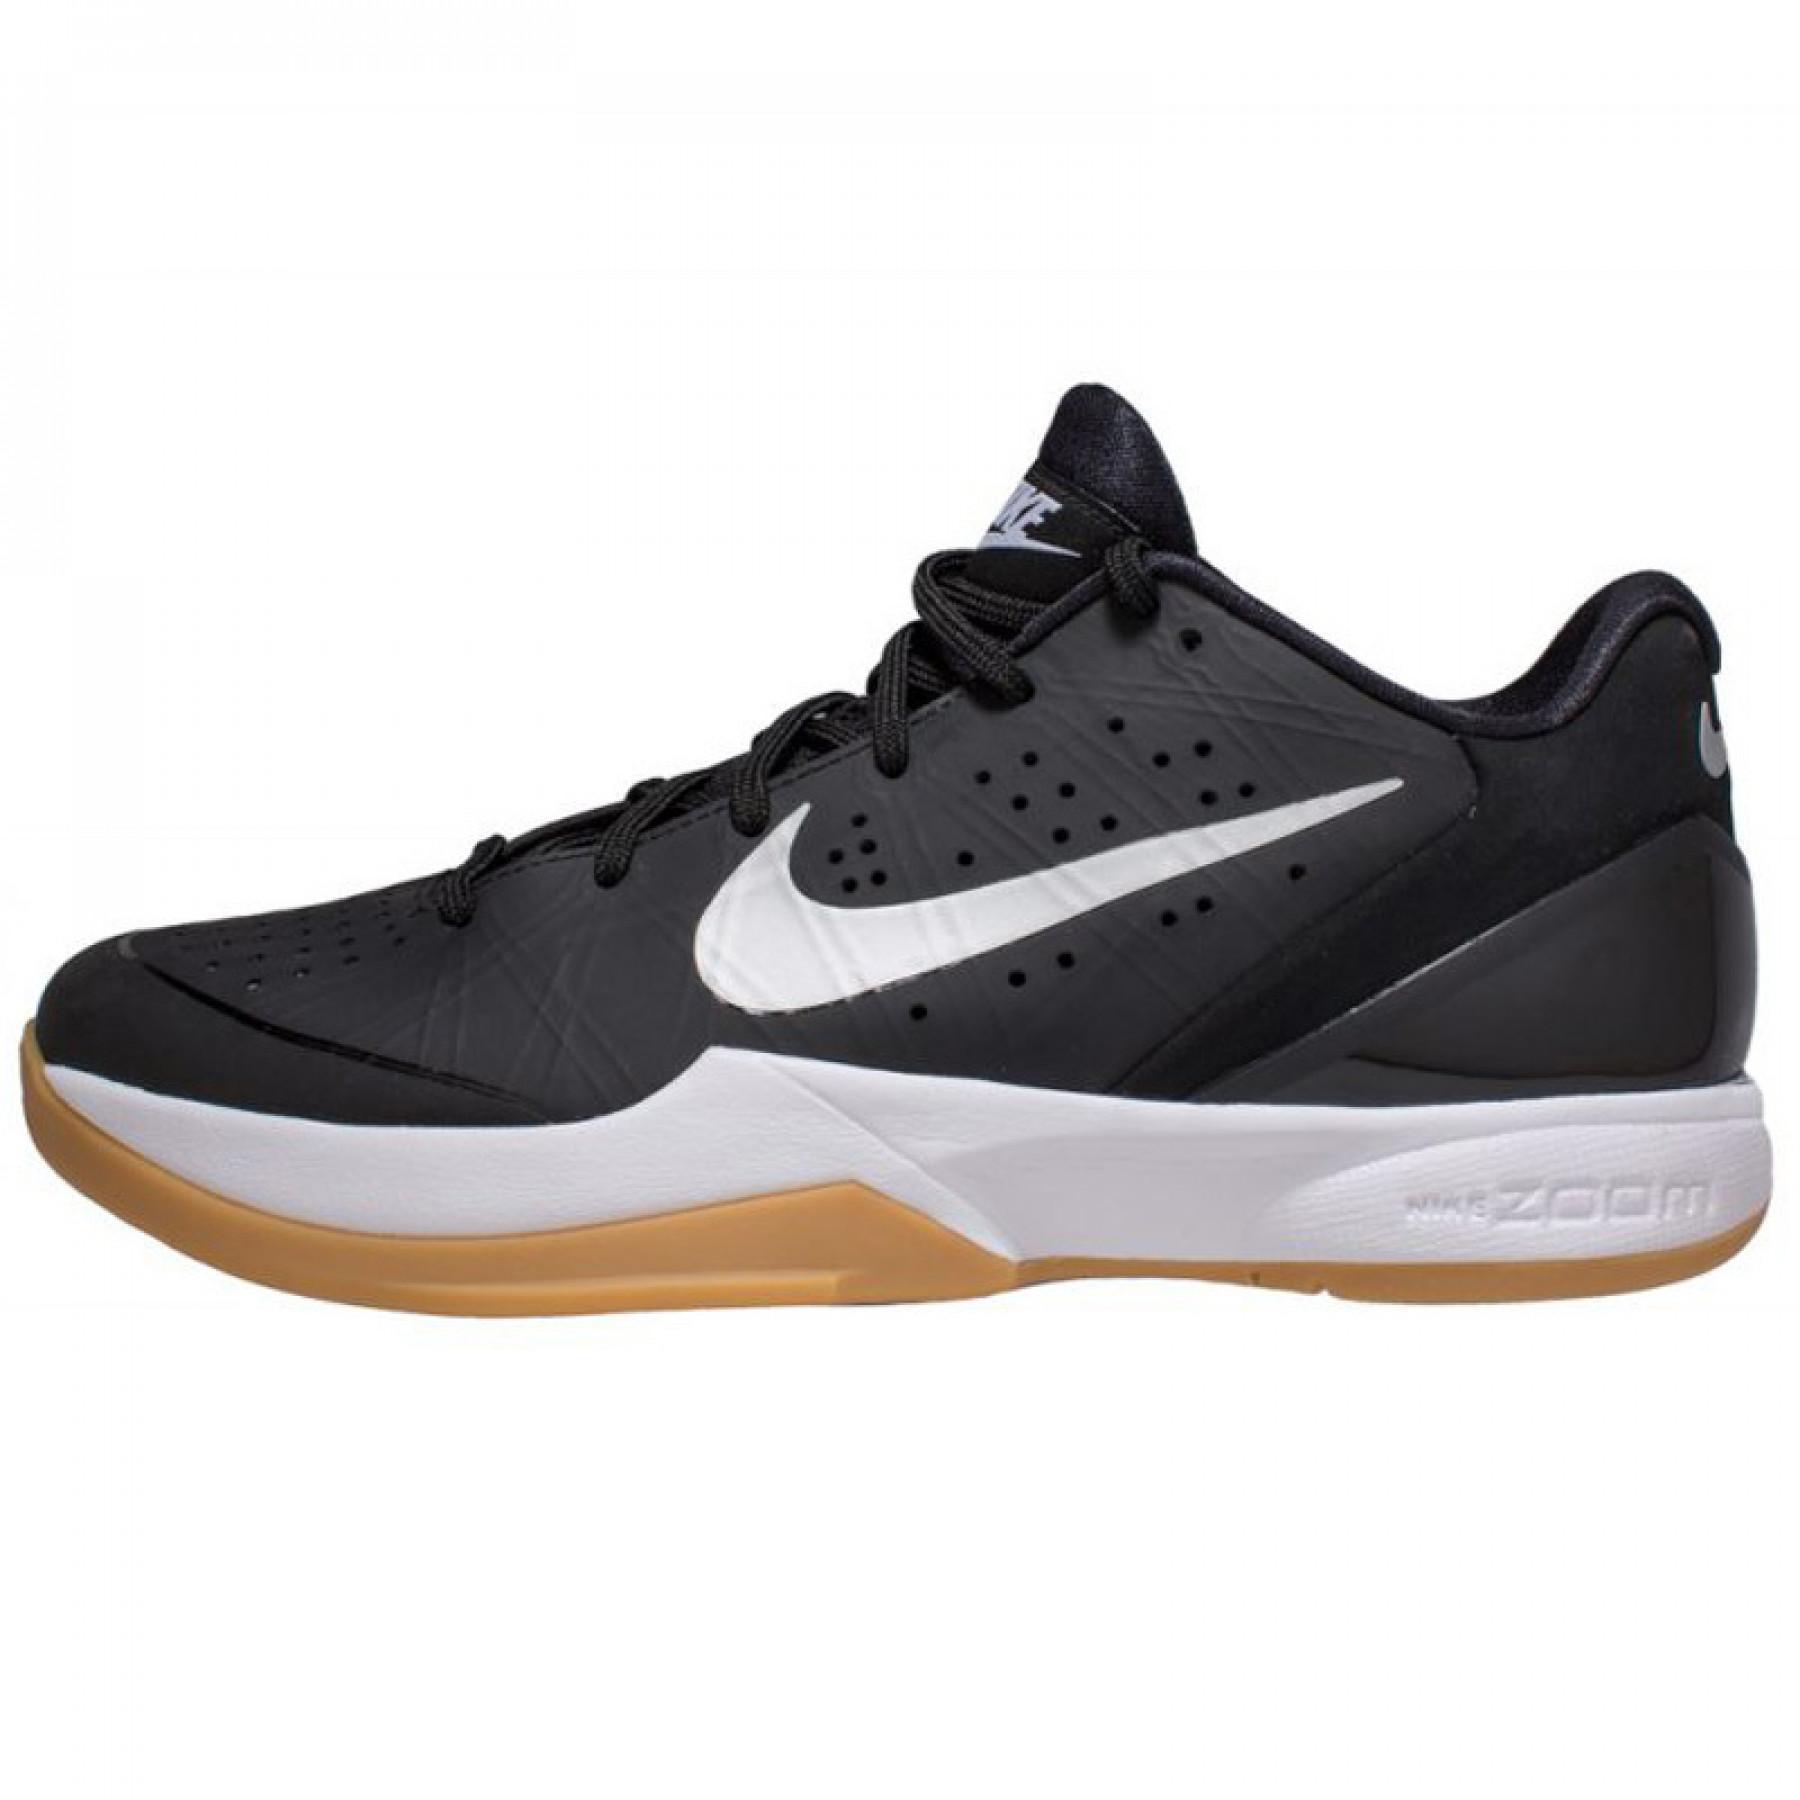 Shoes Nike Air Zoom HyperAttack noir